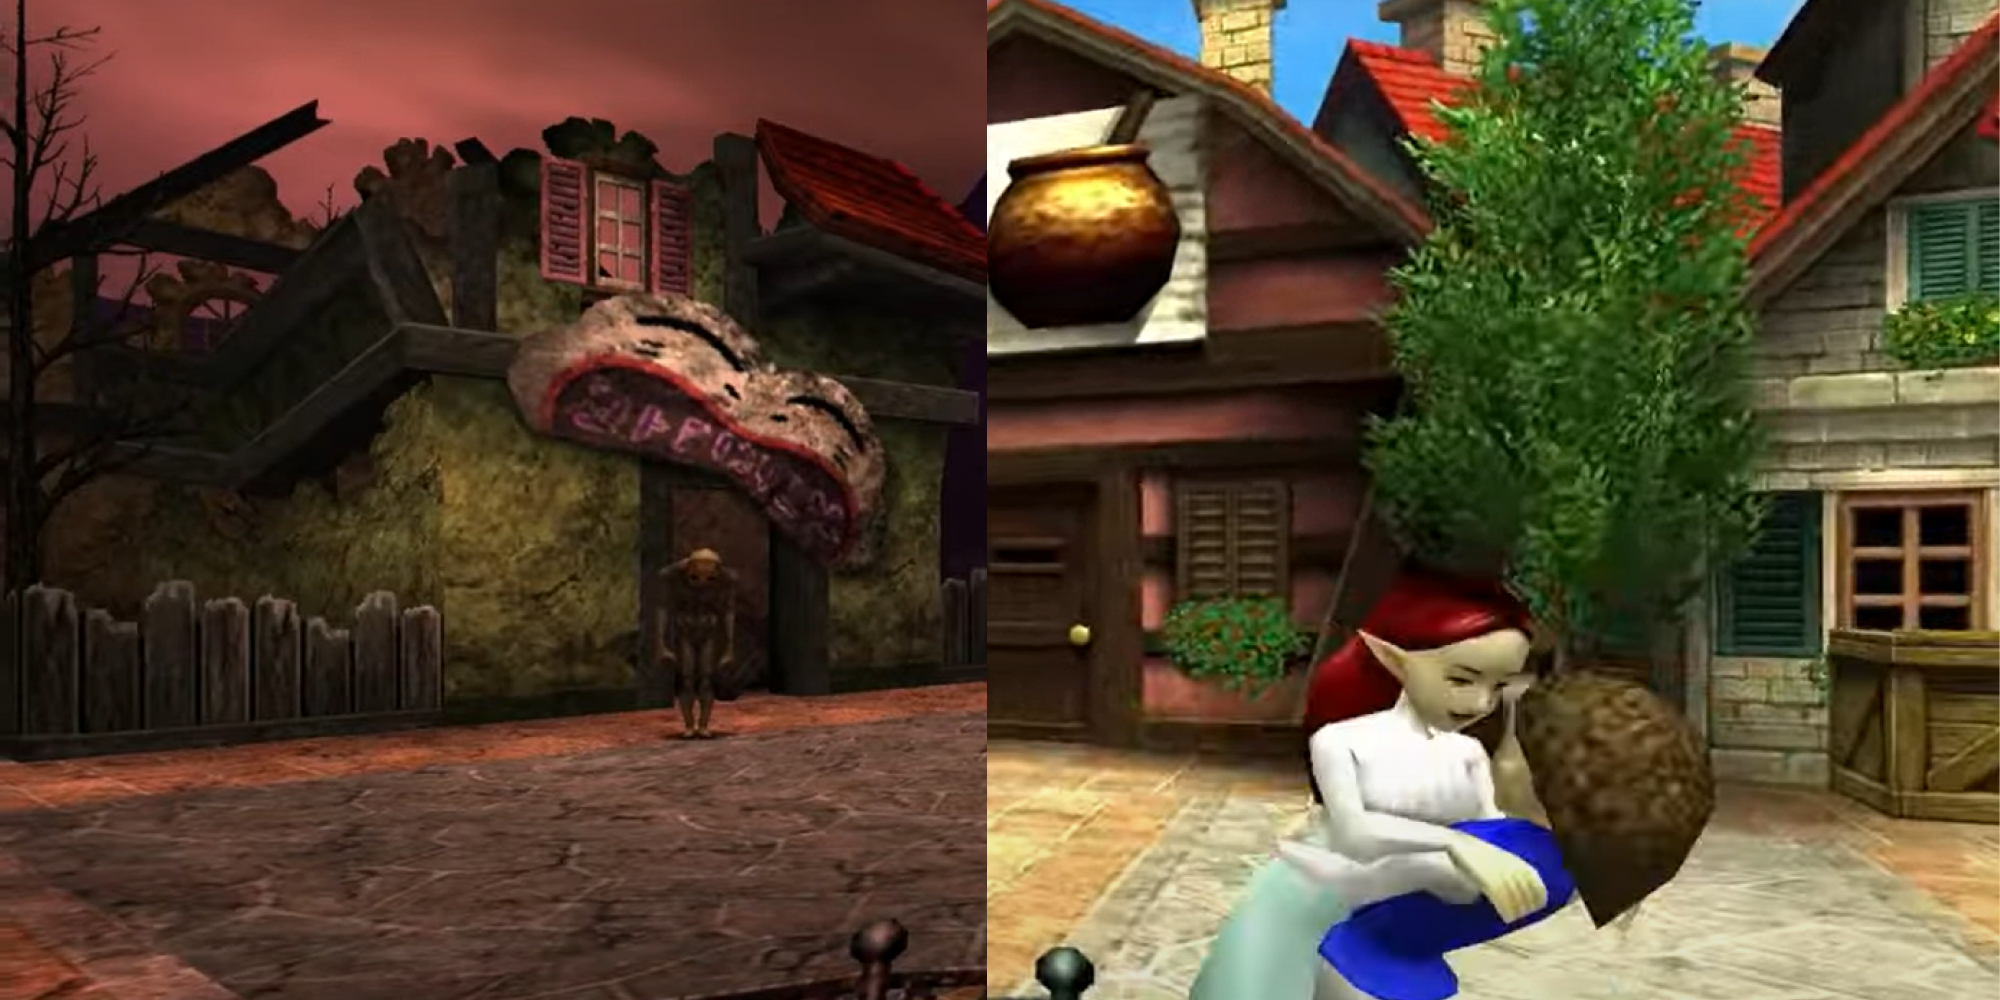 Ocarina of Time's Hyrule Castle Town with Re-Dead on Left and Dancing Couple on Right